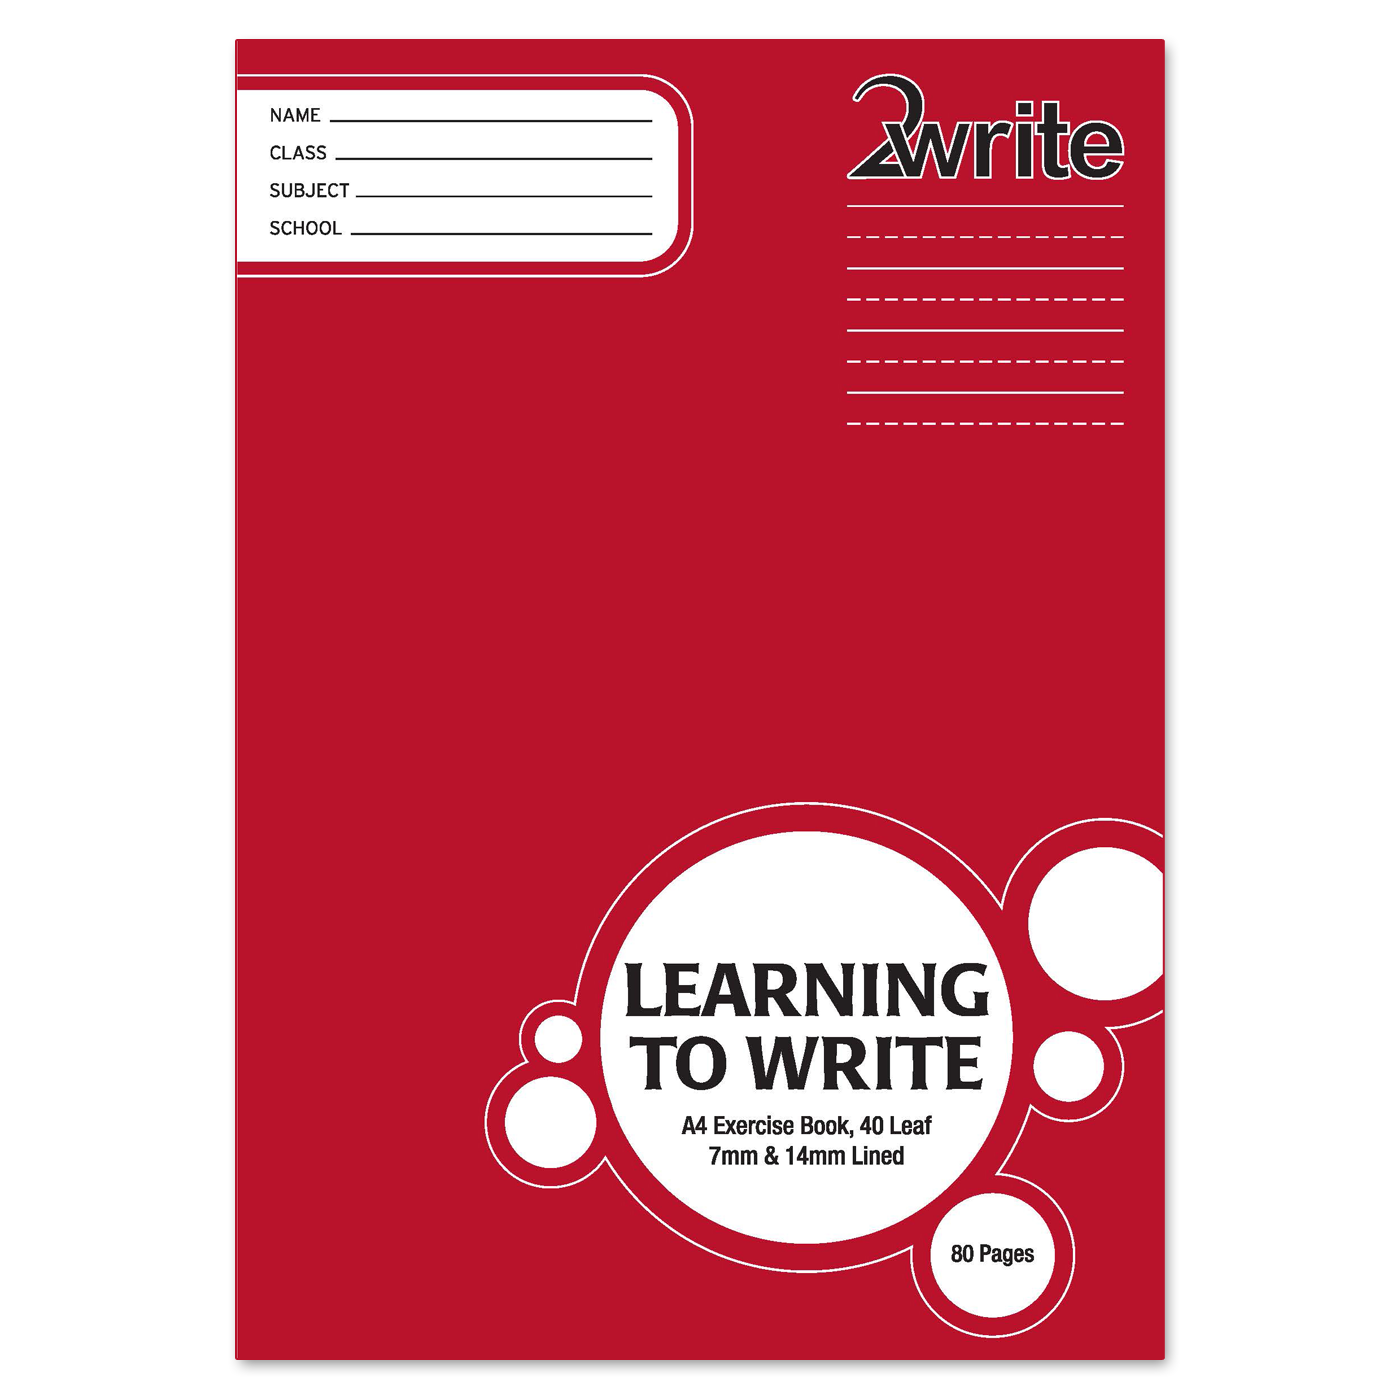 2Write LTW Learn to Write Exercise Book Ruled 14mm and Dashed 7mm 40 Leaf